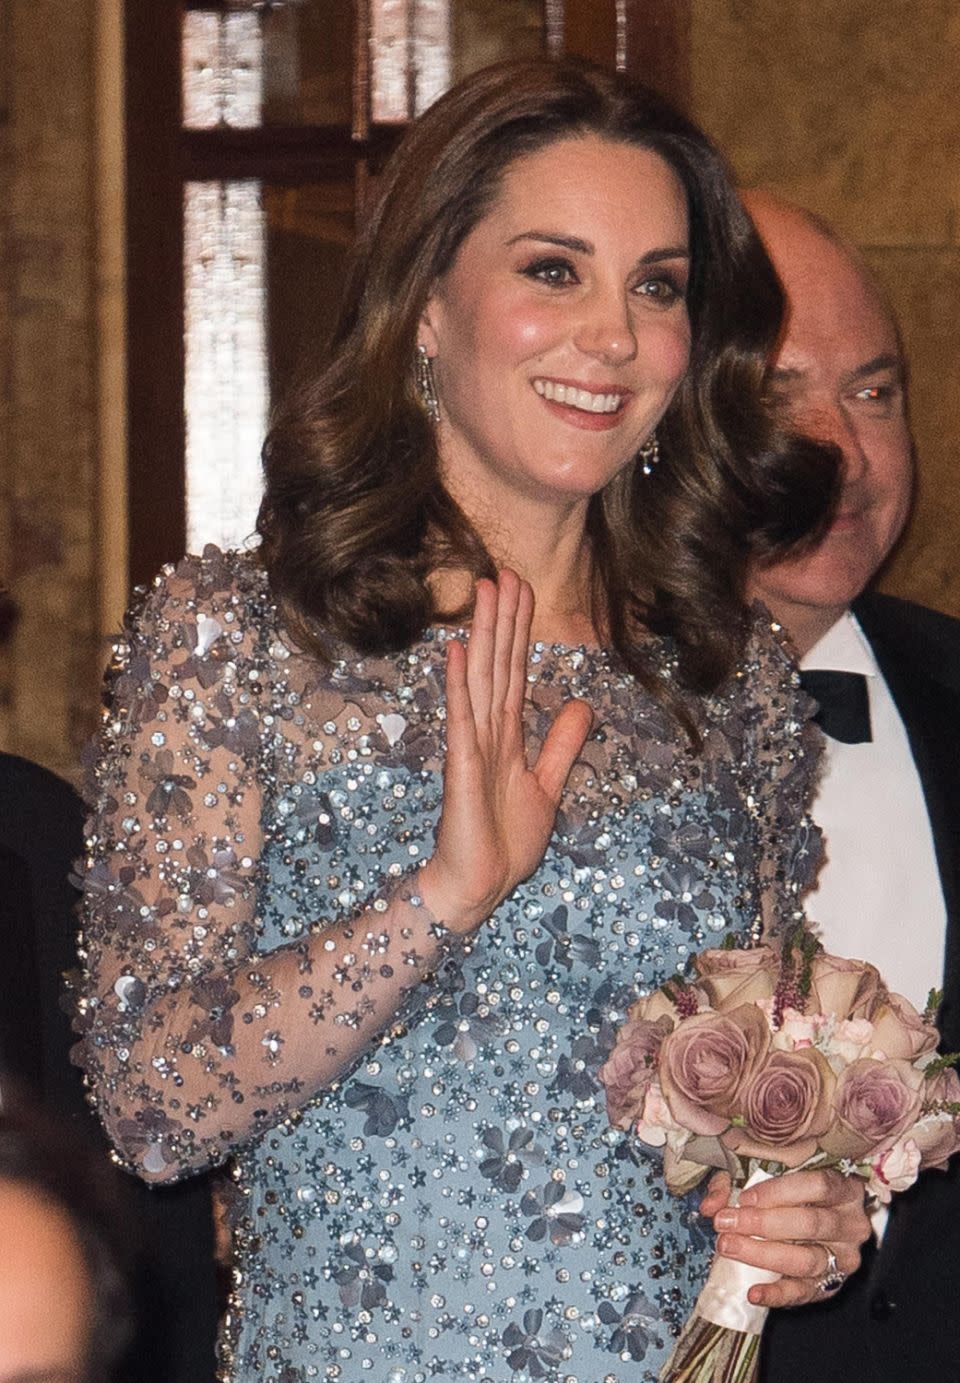 Kate dazzled in a sequin-embellished Jenny Packham gown. Photo: Getty